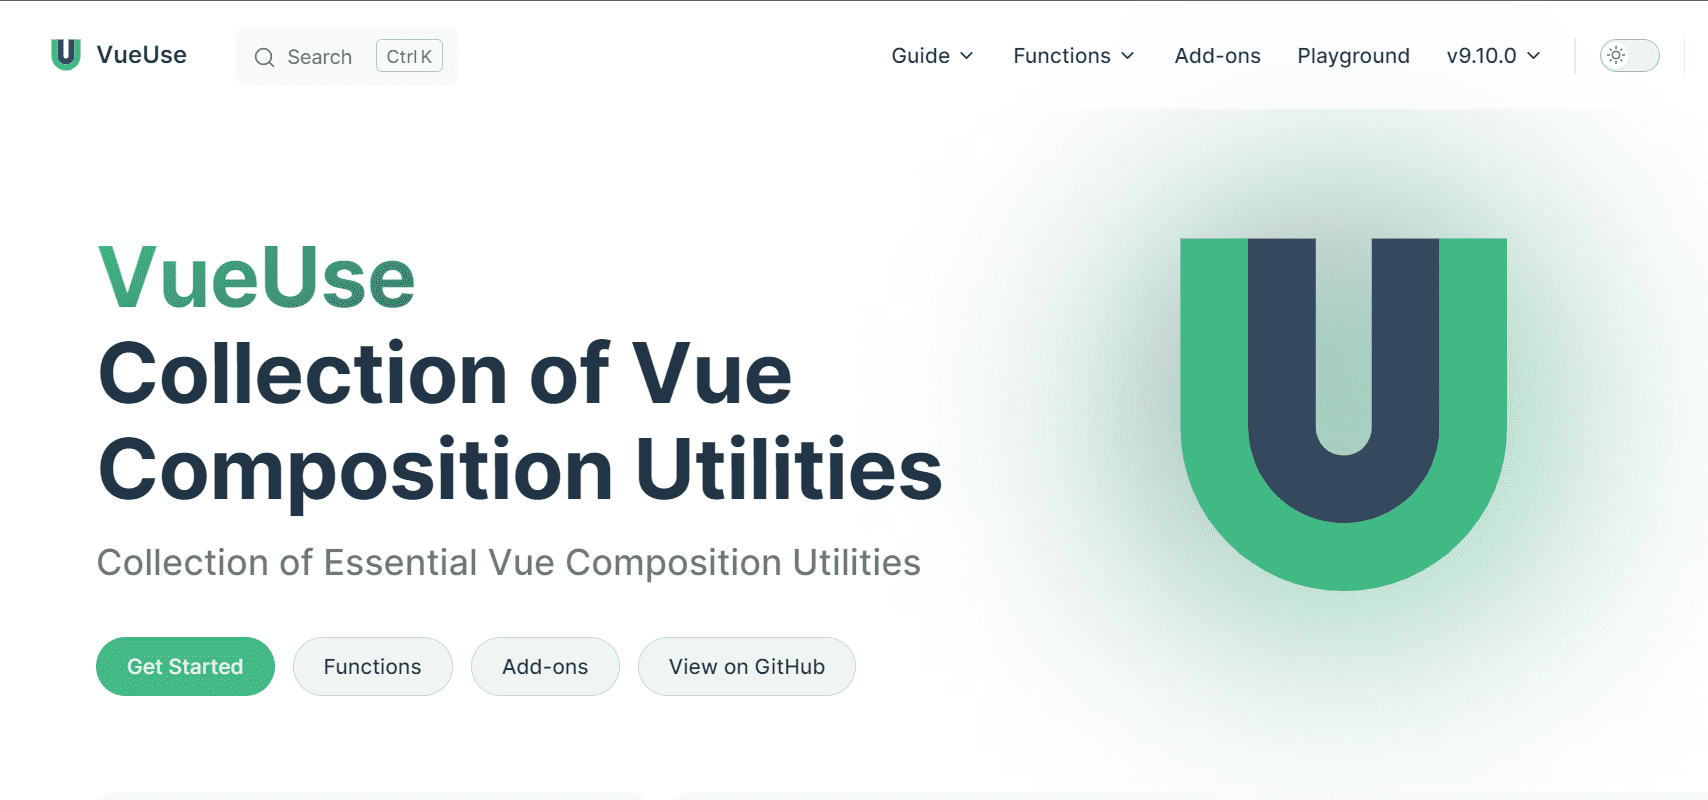 Vue.use